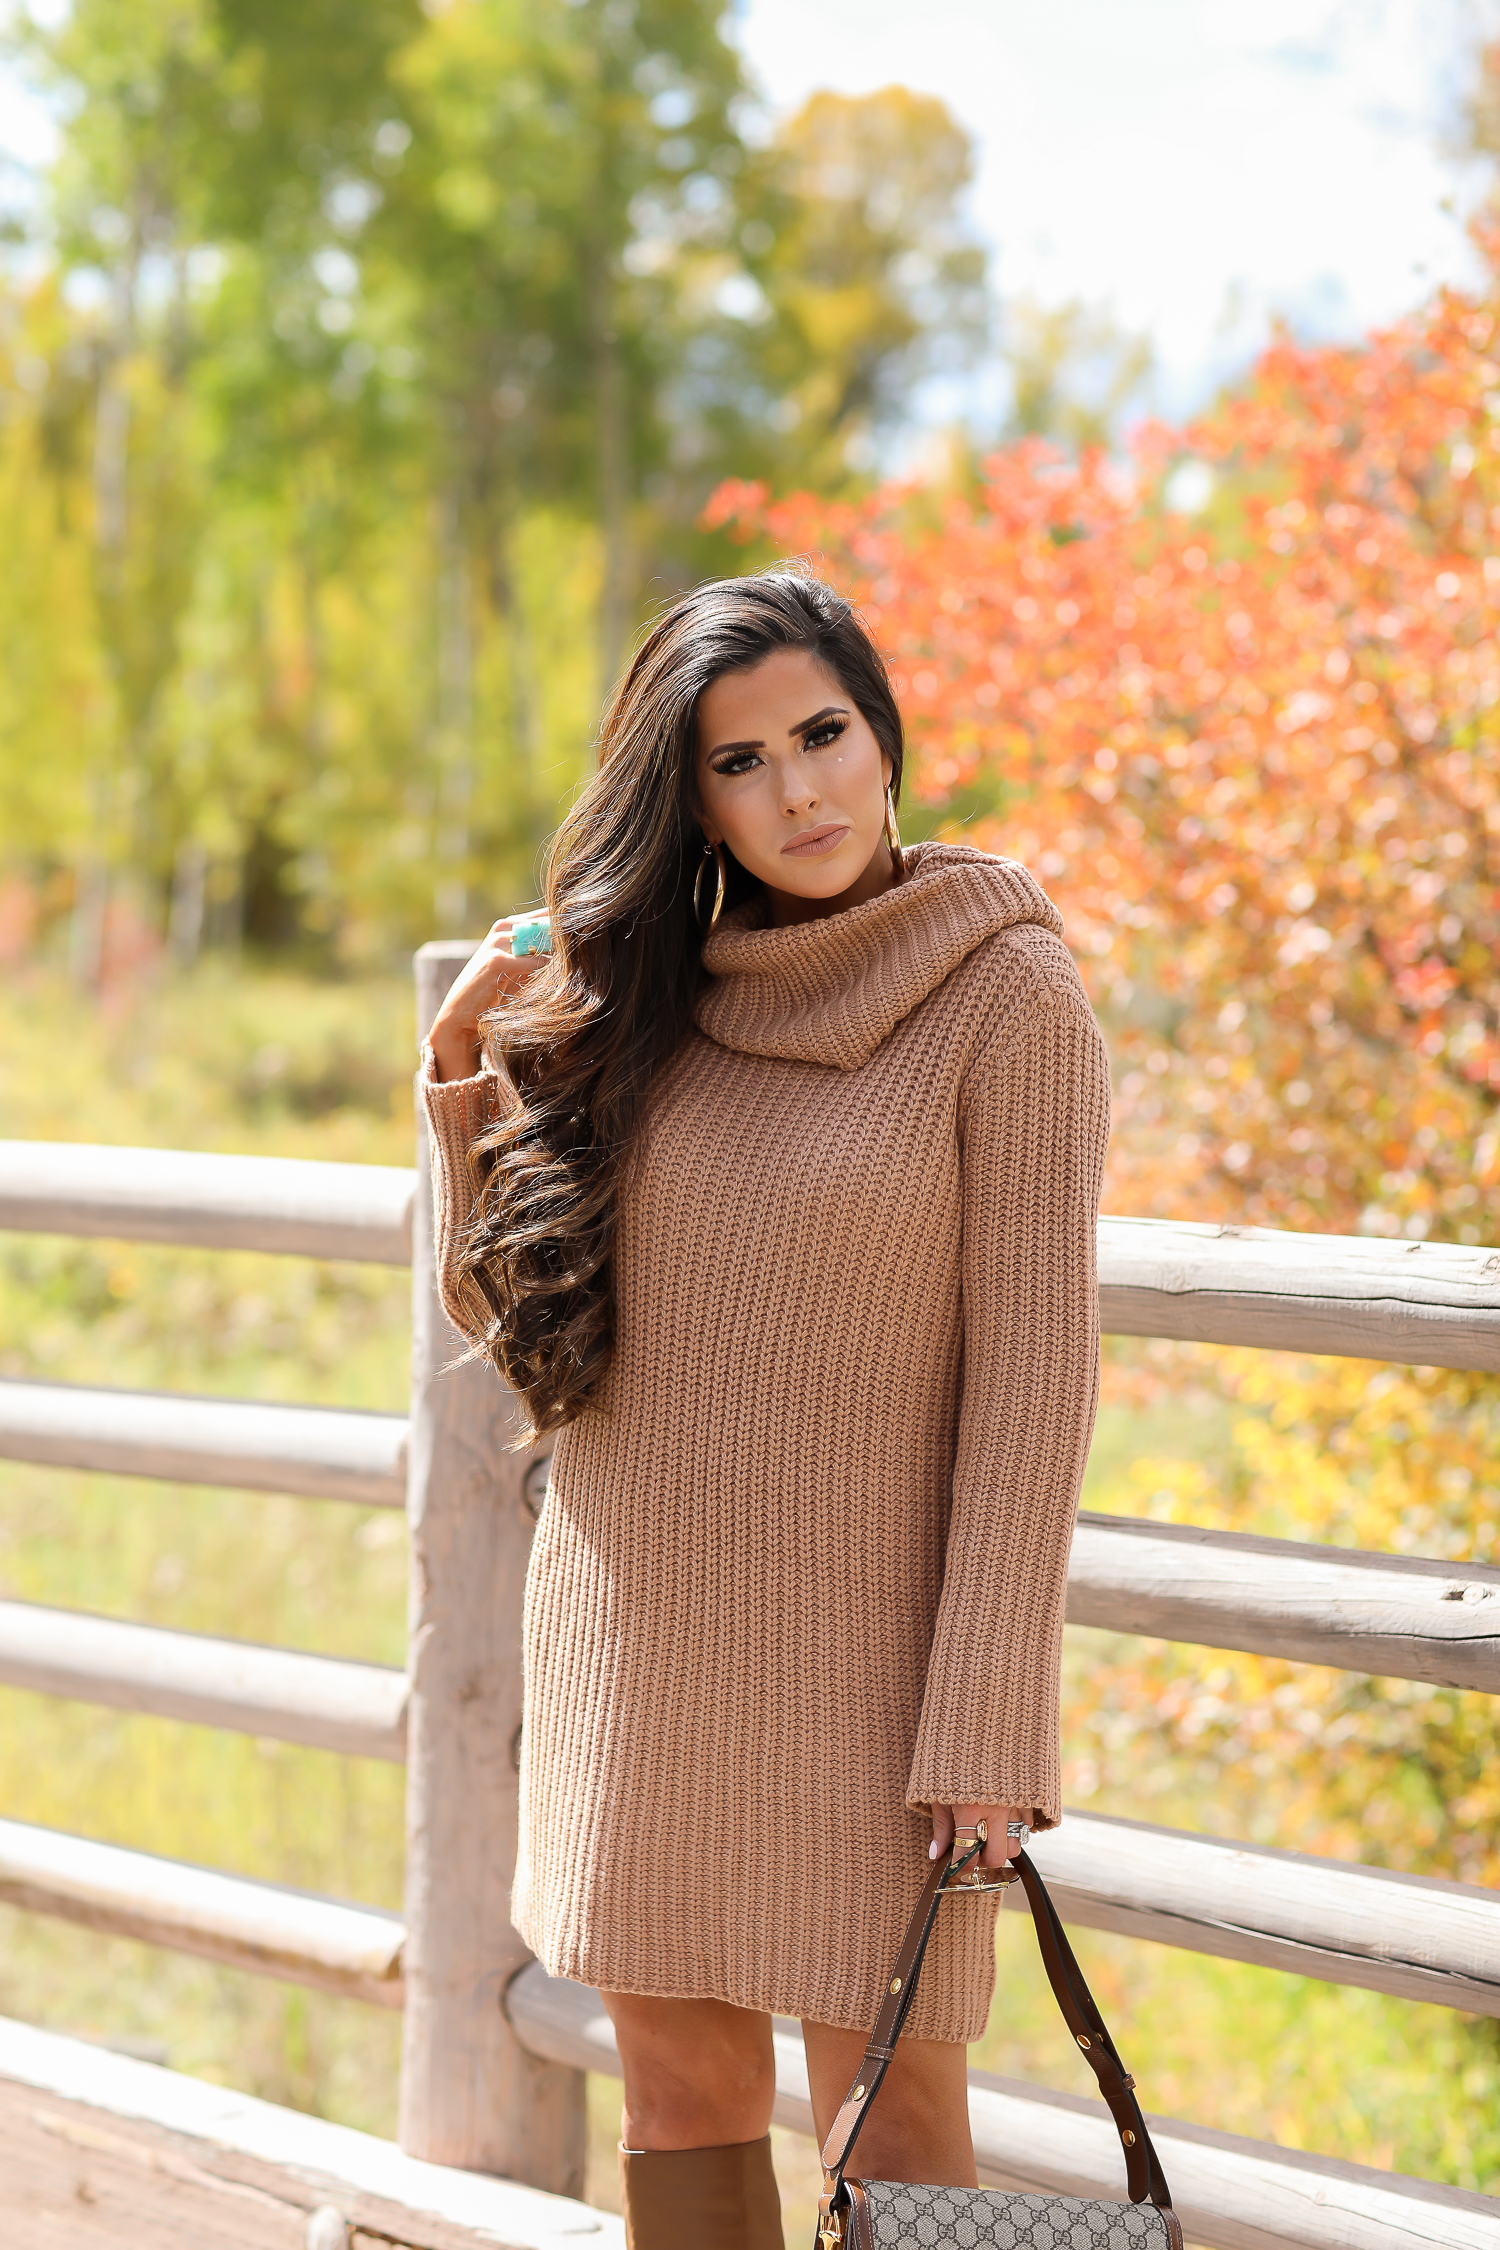 Camel Sweater Dress styled for Fall by top US fashion blog, The Sweetest Thing: image of a woman wearing a BB Dakota camel sweater dress, Sam Edelman boots, Gucci 1955 shoulder bag, Gucci sunglasses, Free People rings, and Argento Vivo earrings | fall fashion outfits pinterest 2019, gucci 1955 horsebit bag, sam edelman raakal boots, cute dresses leather boots pinterest fall fashion, emily ann gemma-2